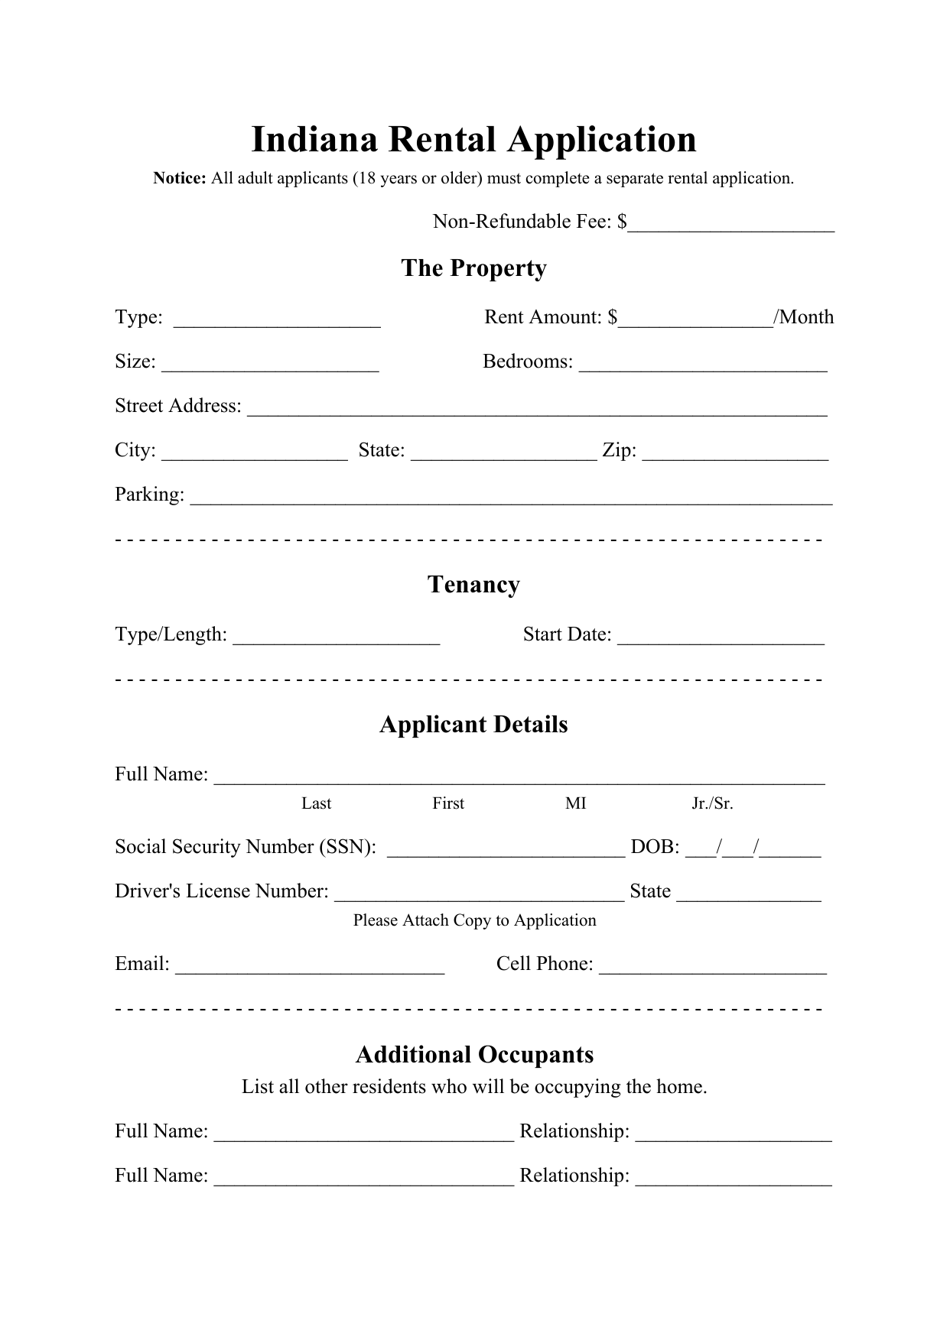 Rental Application Form - Indiana, Page 1